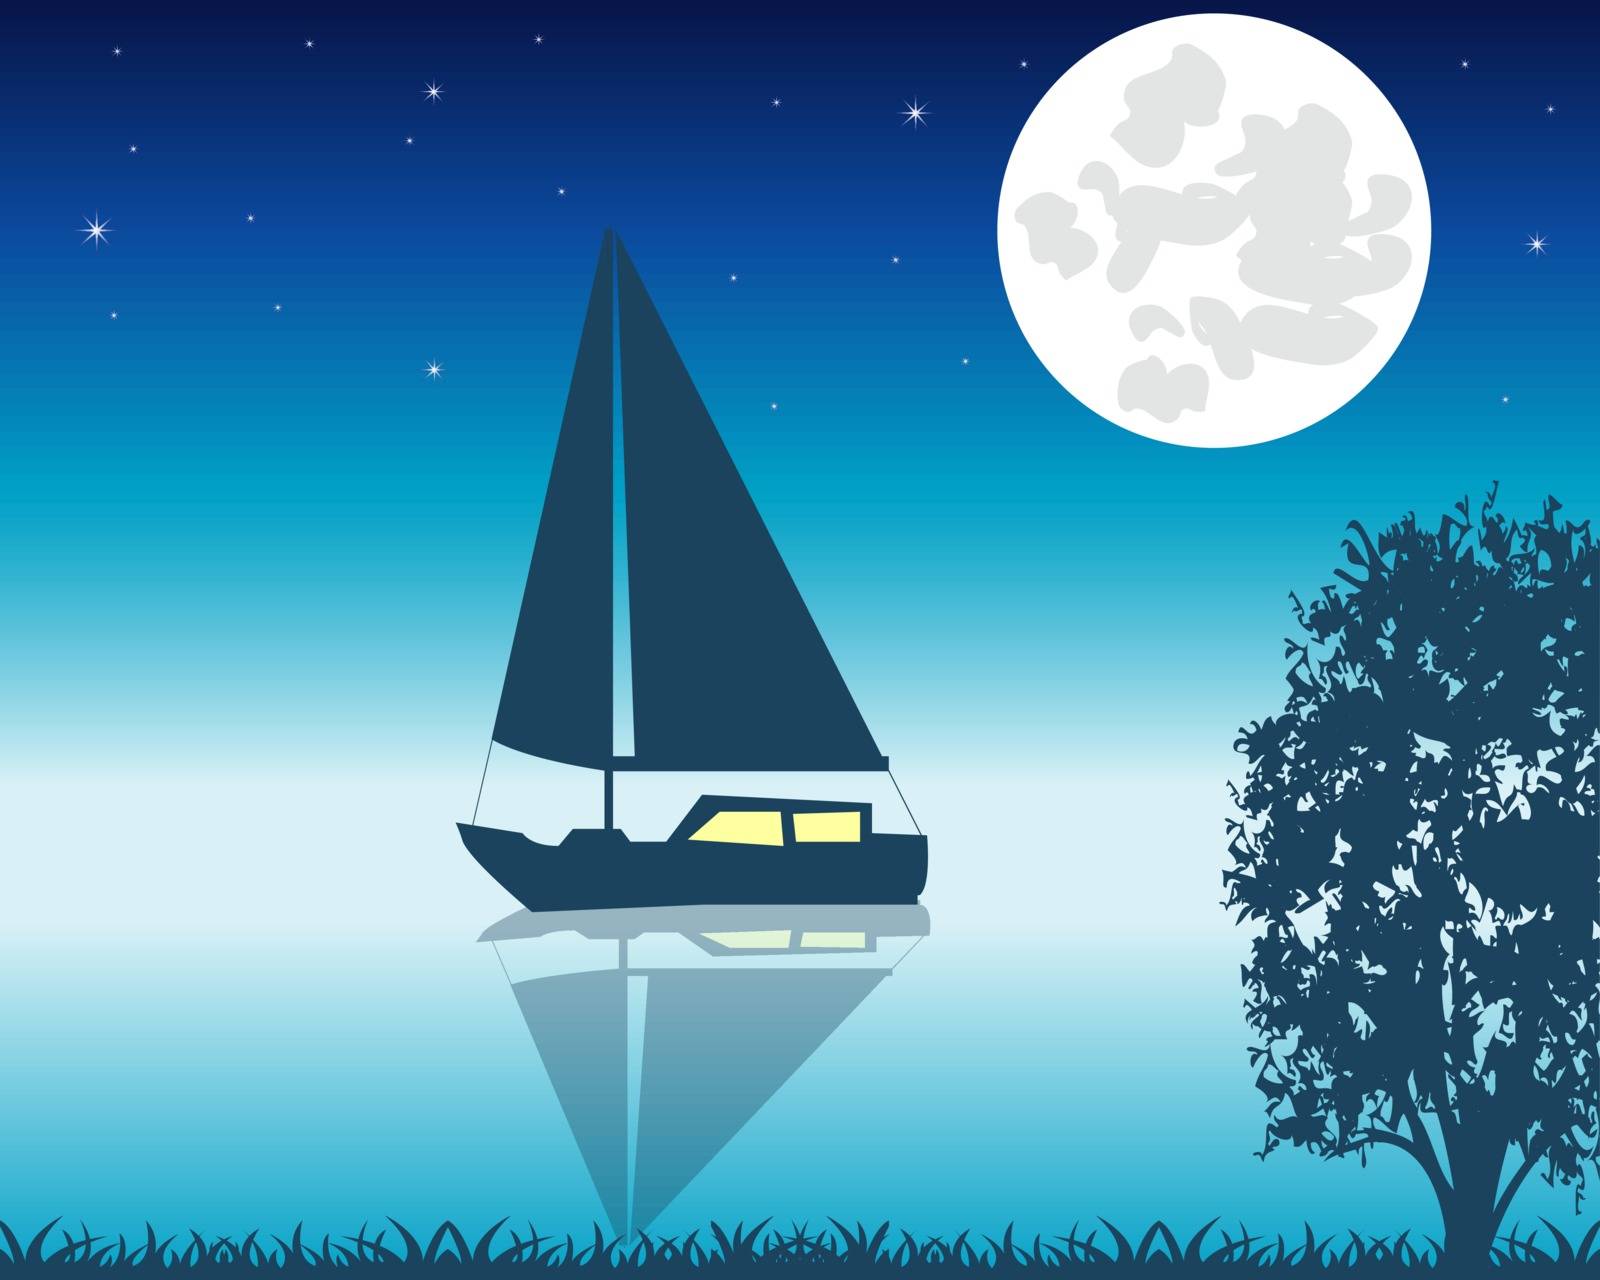 Night sea view, sail boat in the moonlight